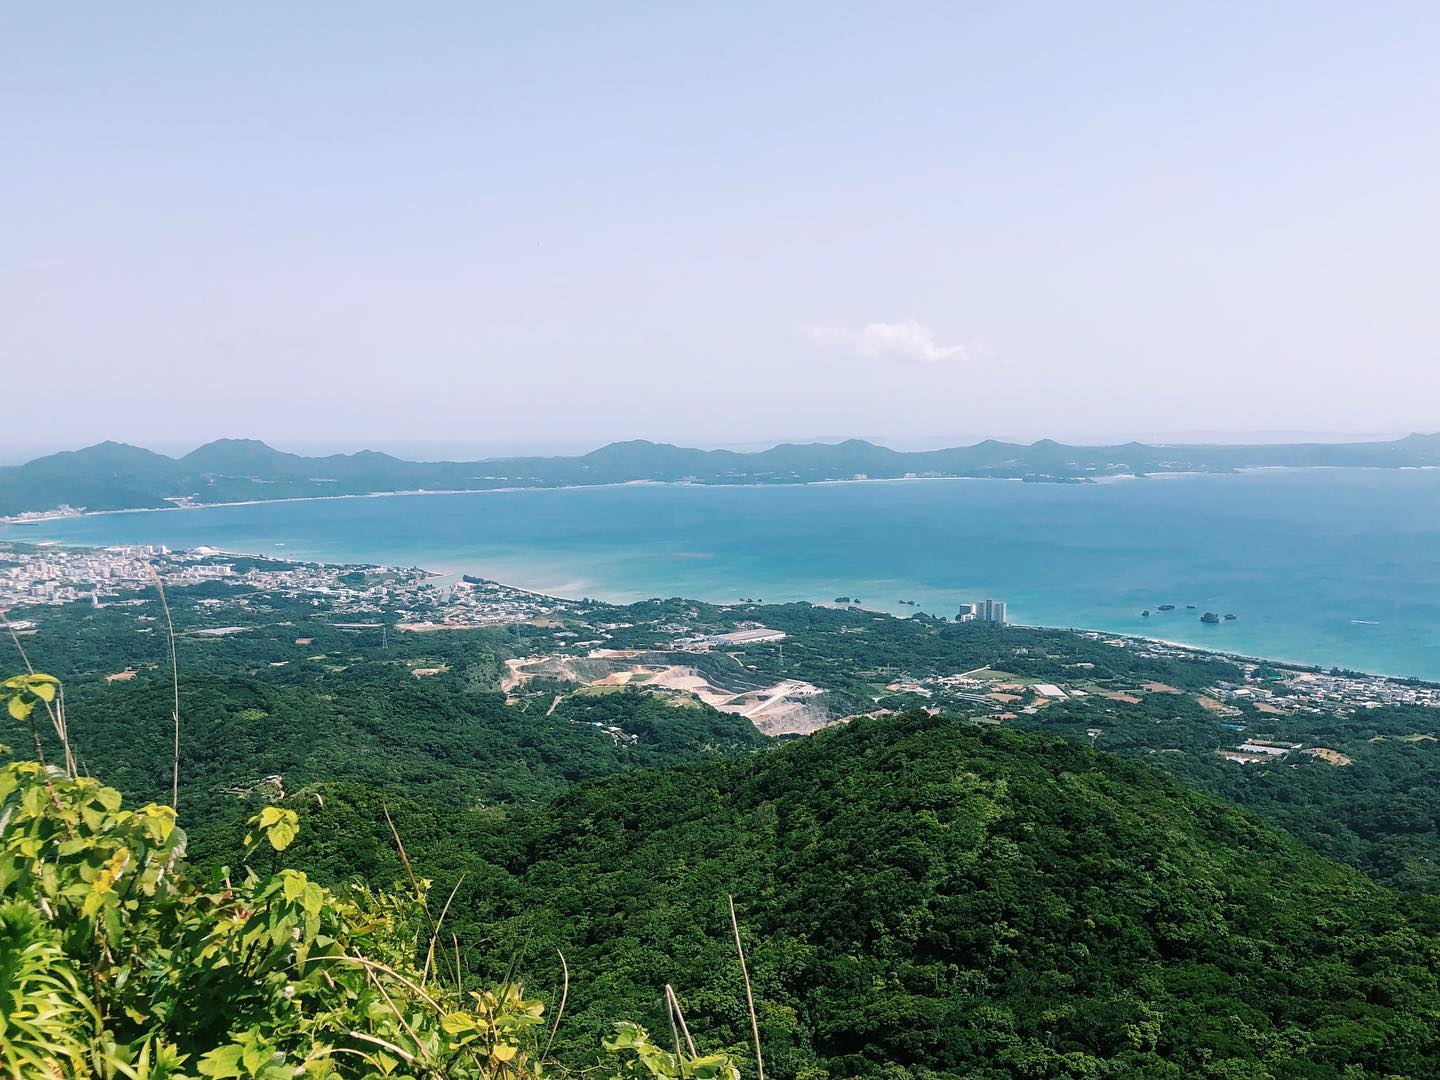 _⁣
Today’s  #shootinjapan from AOI Global is a view of Motobu Peninsula in the northwestern part of Okinawa’s main island🏝

The Motobu Peninsula is home to Emerald Beach, selected as one of the 100 best beaches in Japan and Churaumi Aquarium which houses two whale sharks

#aoiglobal  #filmproduction  #productioncompany  #filmmakersworld  #productionservices  #shootinglocation  #filmwork  #filmmakinglife  t #weeklyinspiration  #remoteshoot  #remoteshootinjapan  #remoteshooting⁣